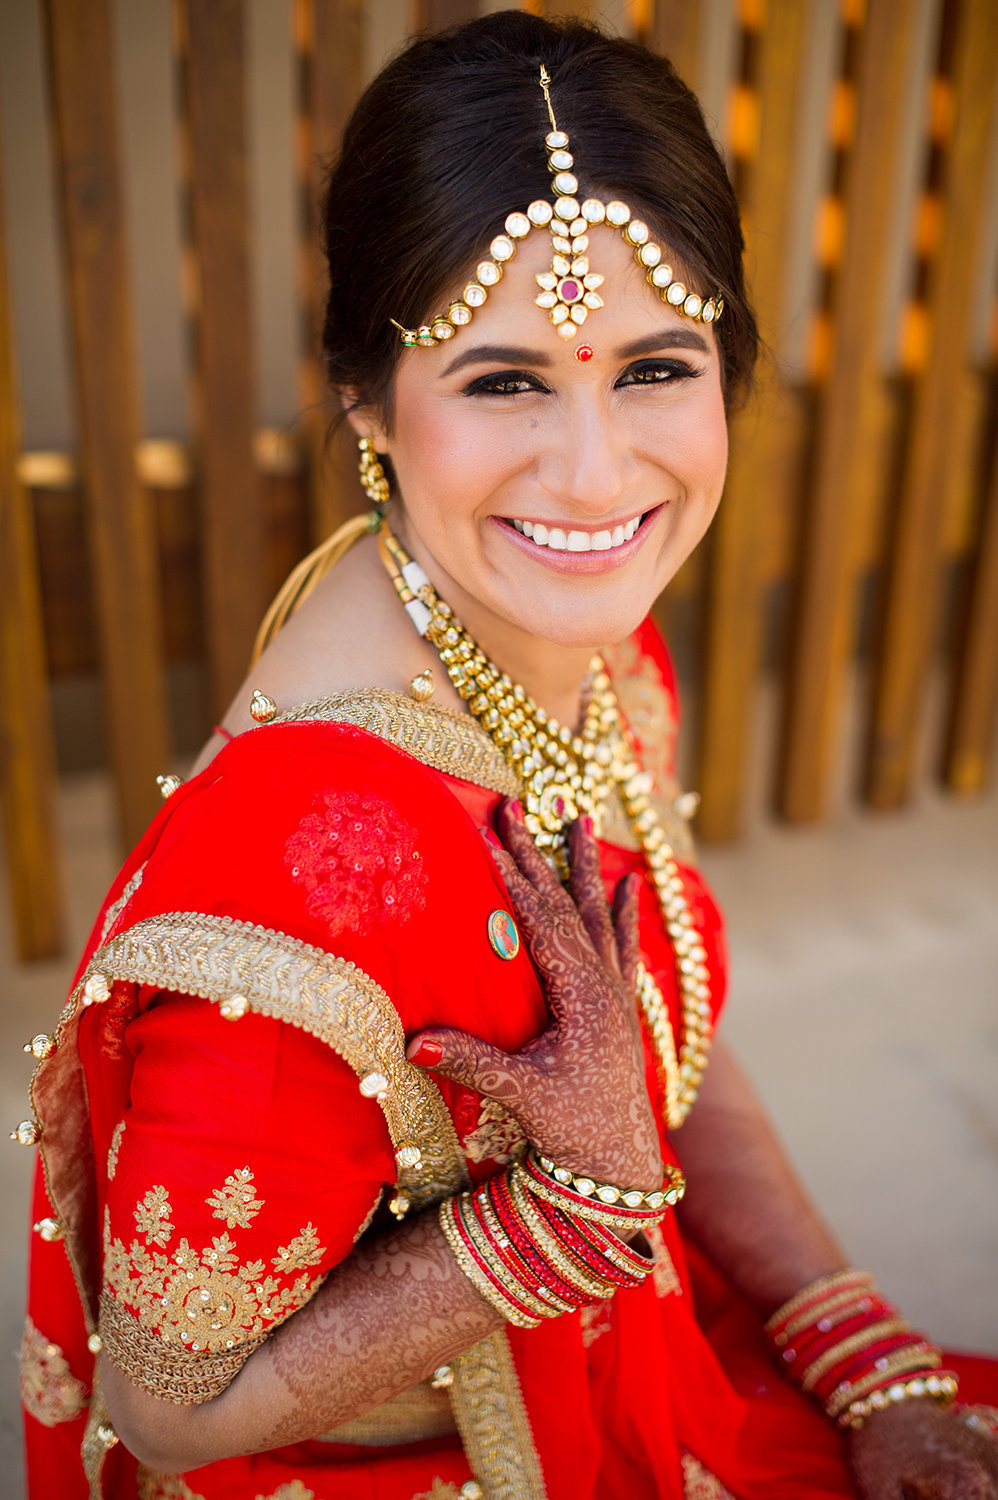 Beautiful Hindu Bride with Henna and Indian Jewelry